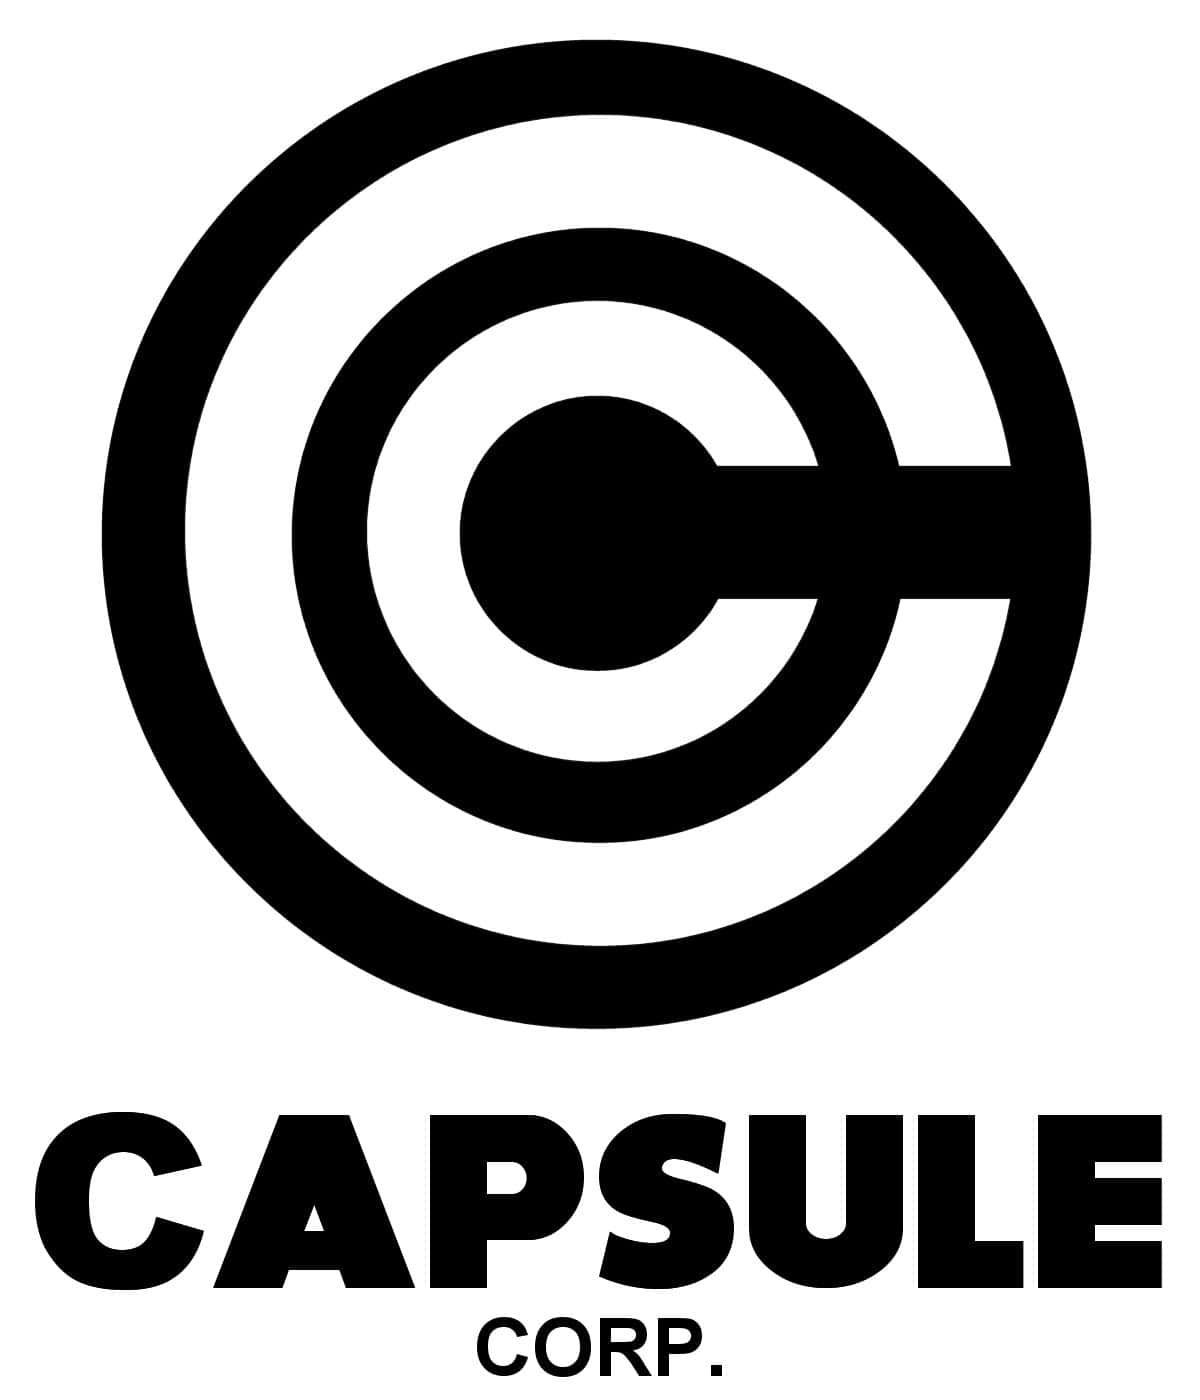 "Growth and innovation with Capsule Corp" Wallpaper